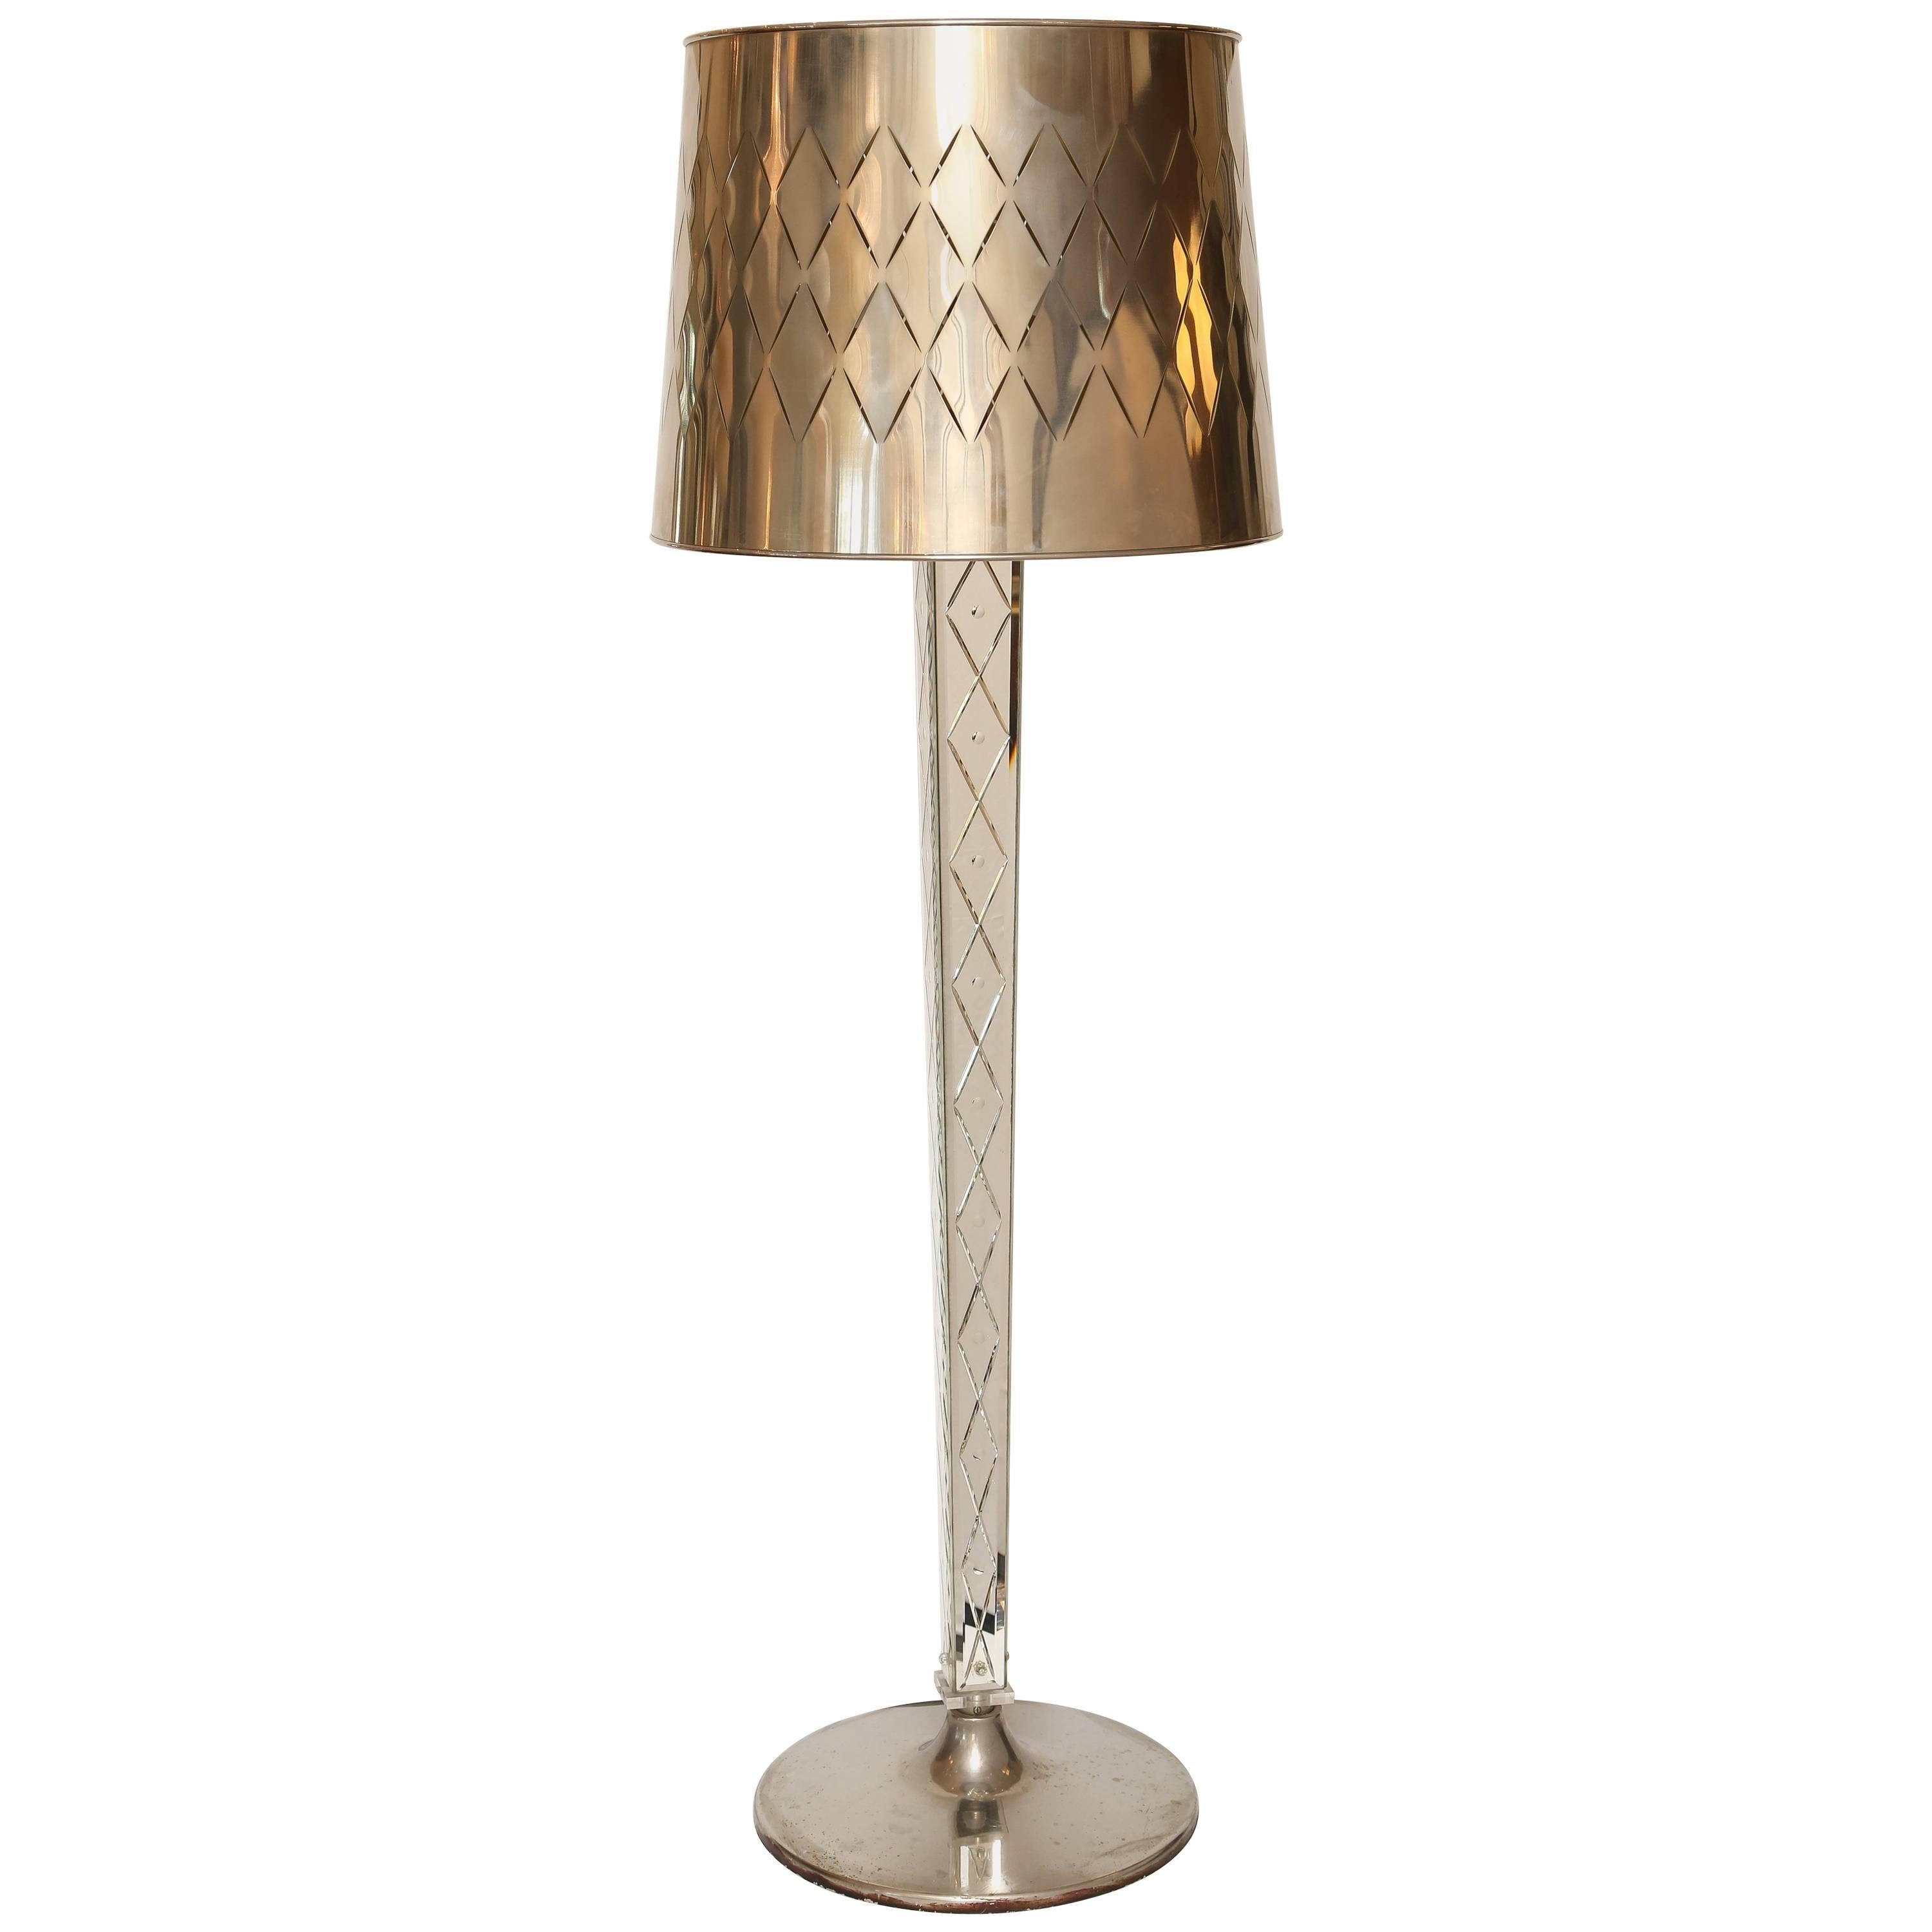 Philippe Starck Mirror Floor-Lamp from the Delano Hotel South Beach